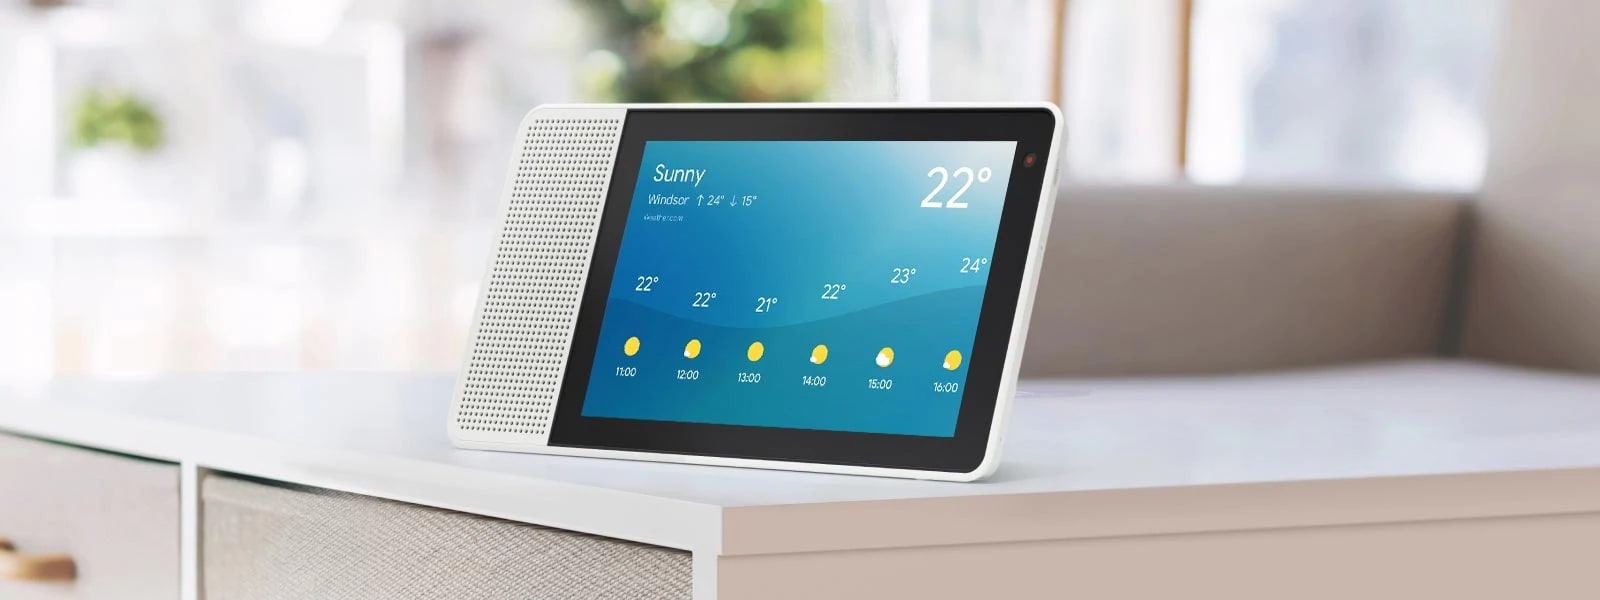 Lenovo Smart Display prepares you to meet your day with weather forecast.